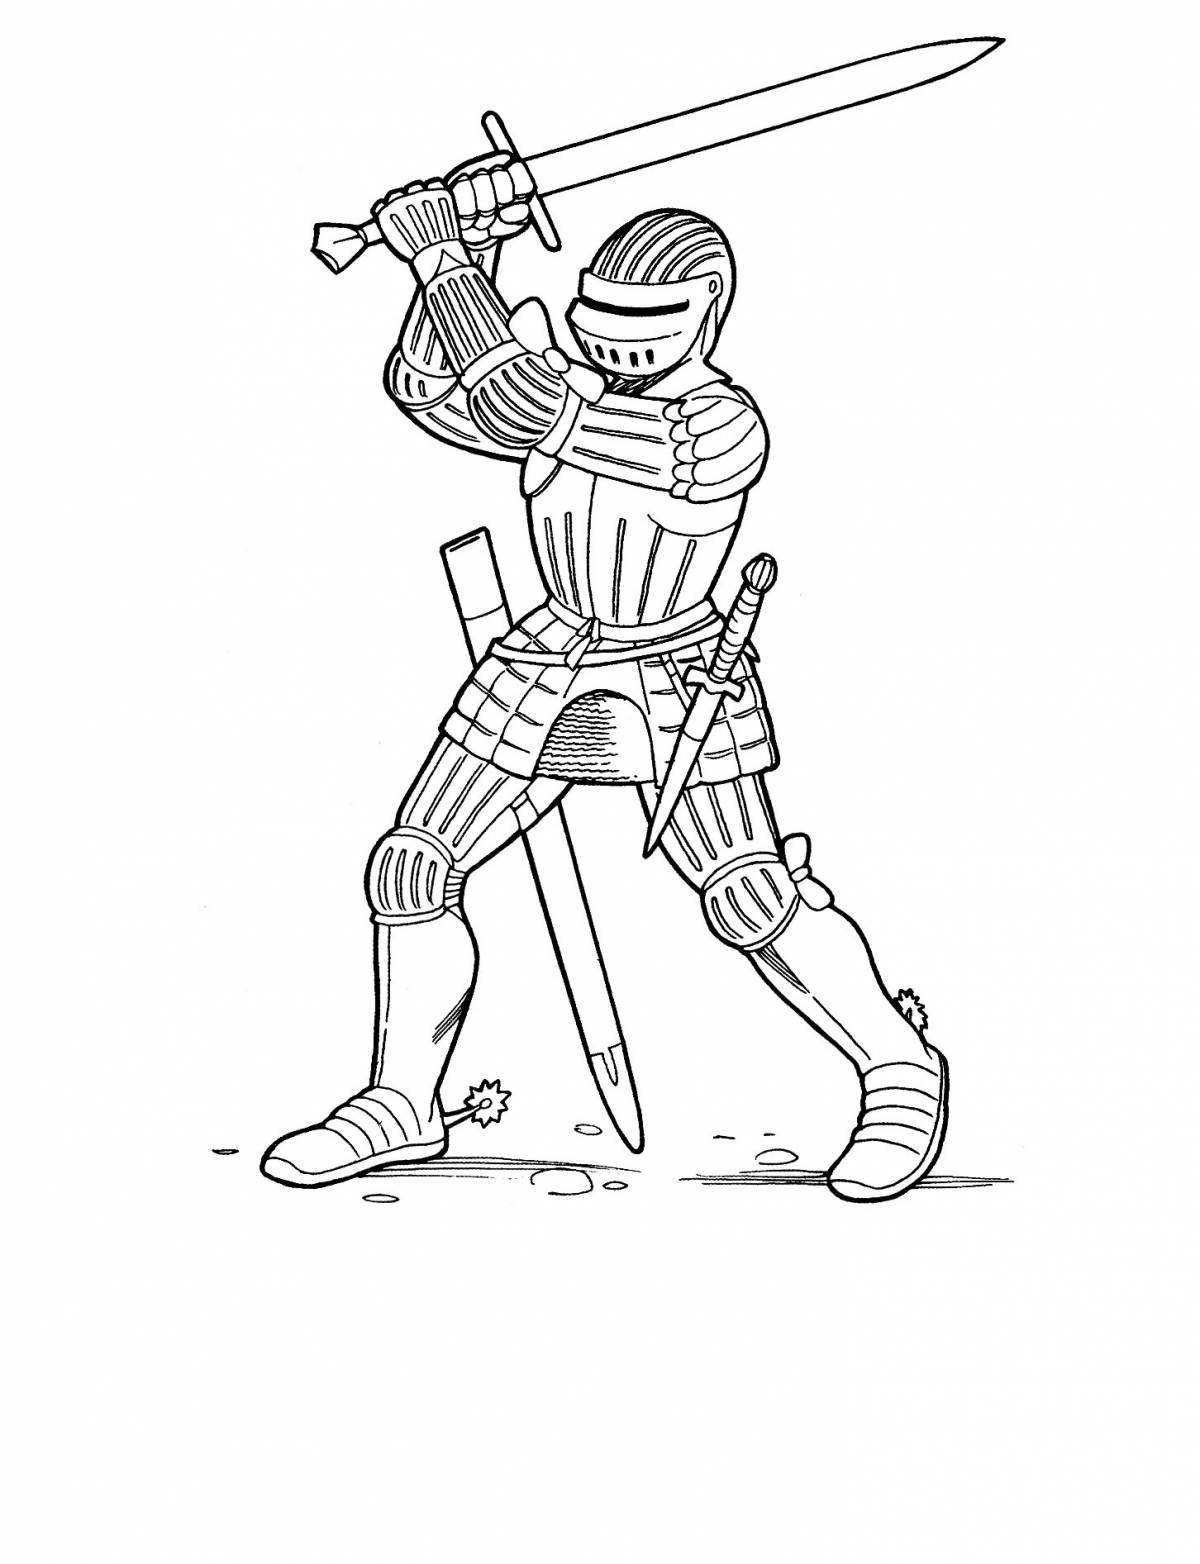 Radiant coloring page armored knight